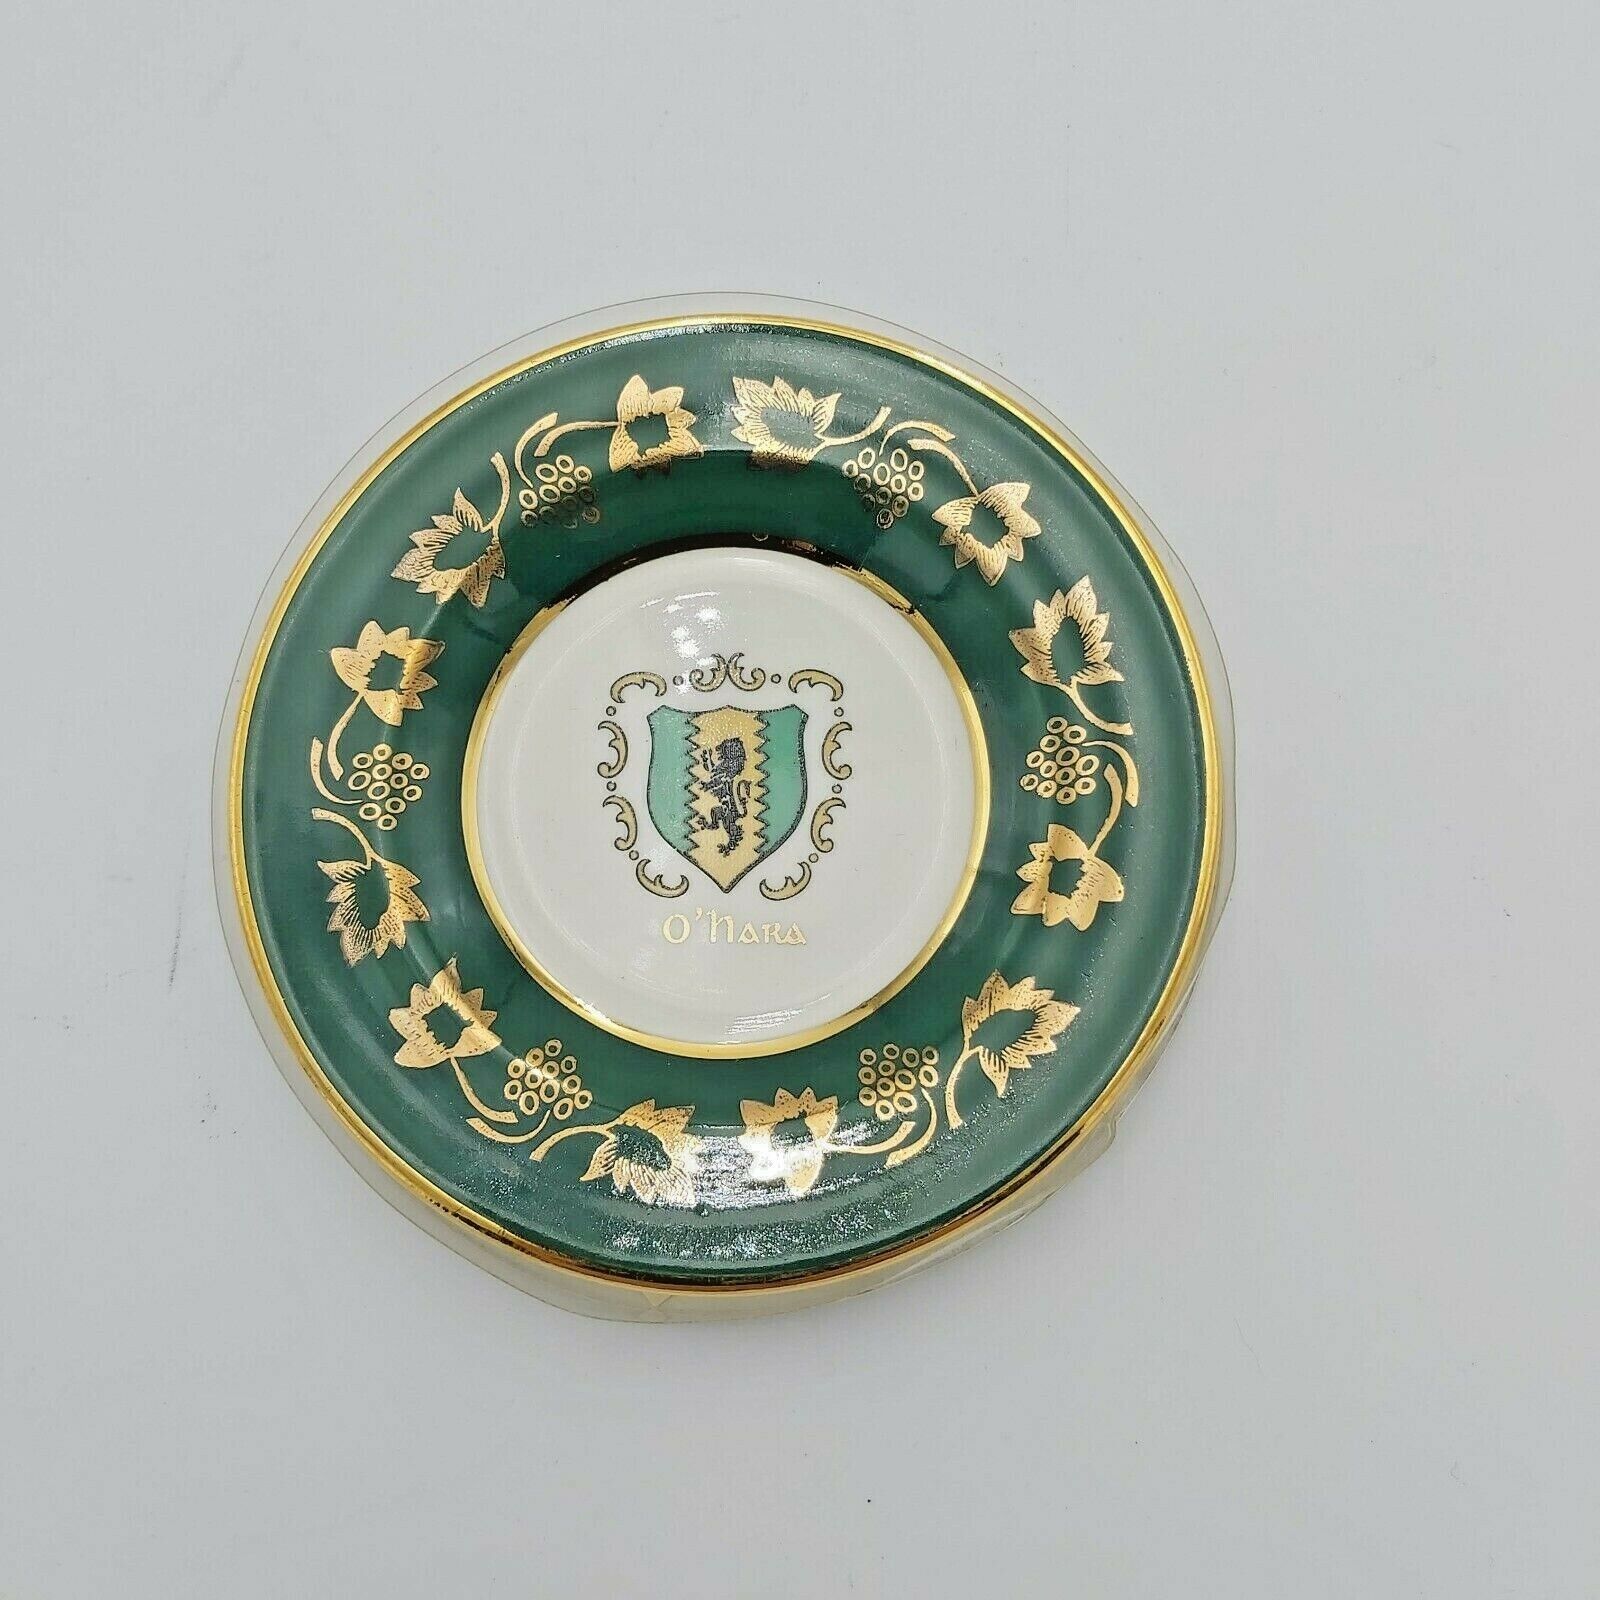 Miniature Wall Plaque - O'hara - From Historic Families Of Ireland - 4" Diameter